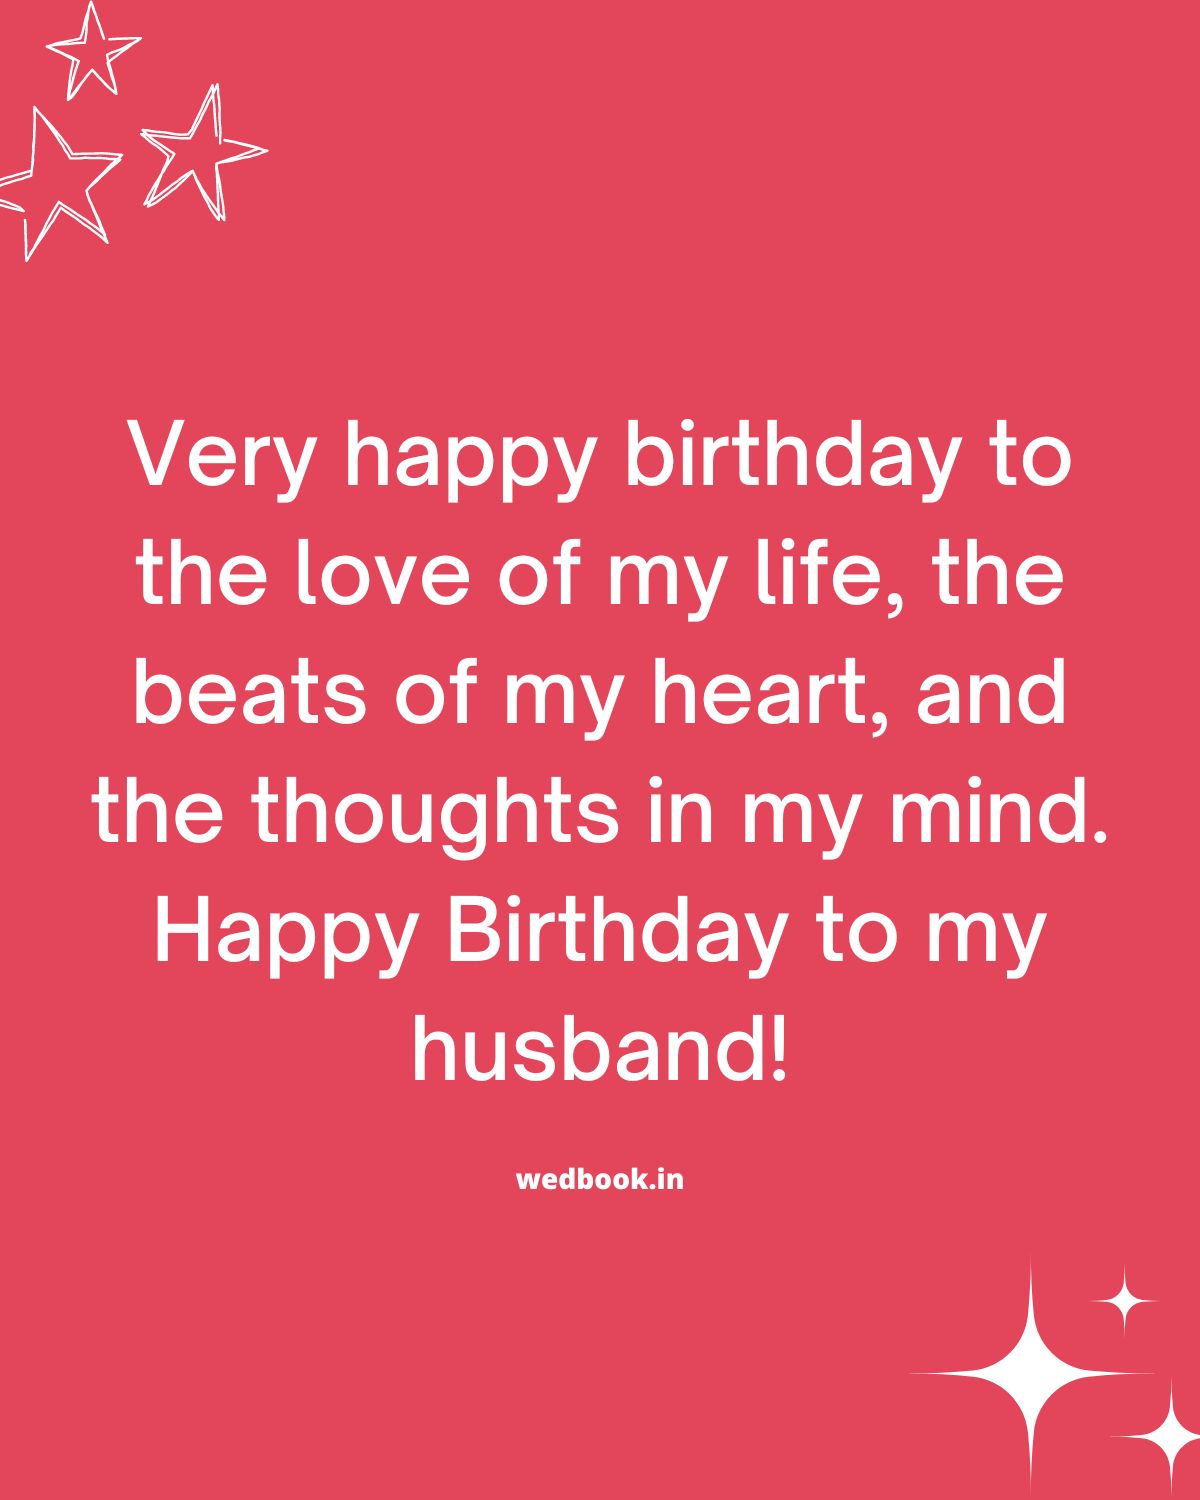 151 Birthday Wishes For Husband Romantic And Unique Wedbook 5305